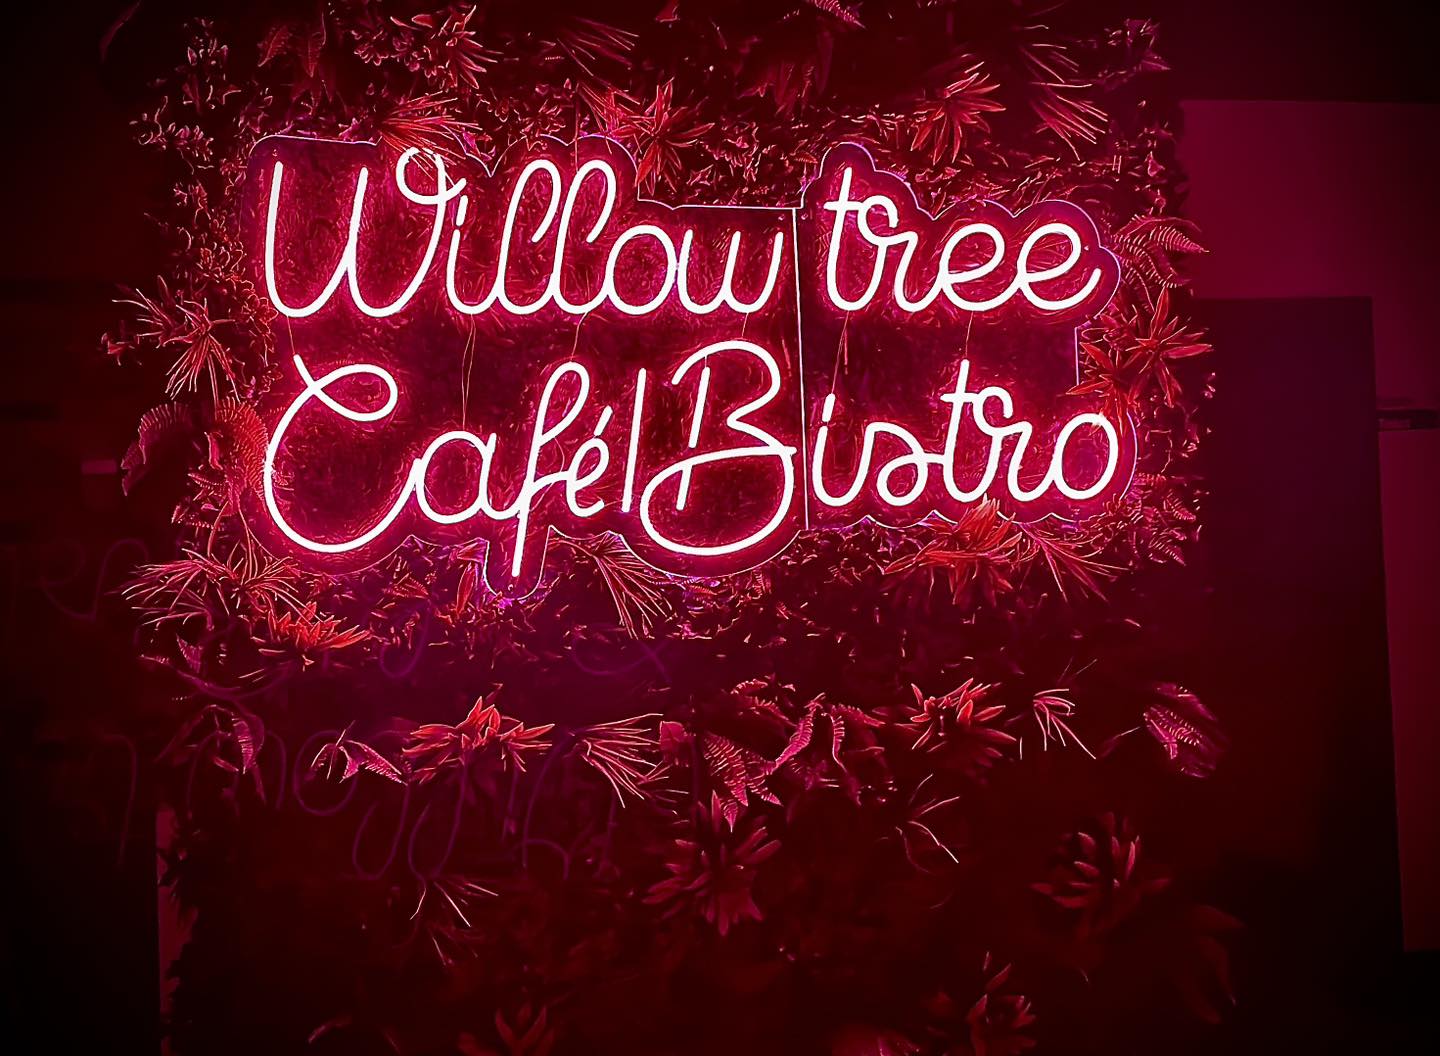 The Willow Tree Café/Bistro is located at The Hilcote Country Club